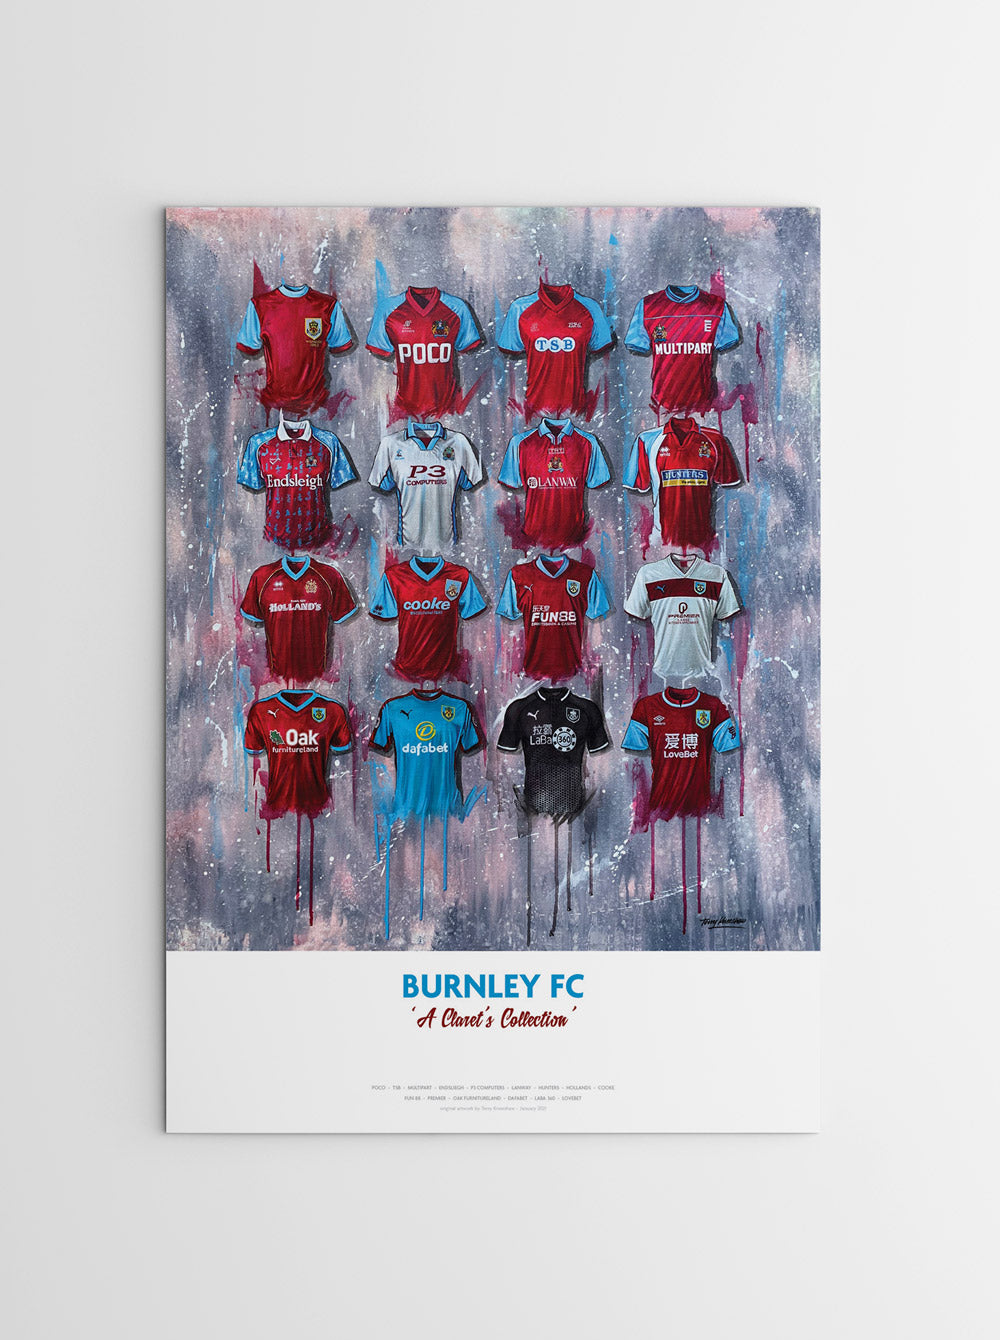 Burnley FC Shirts - A2 Signed Limited Edition Personalised Prints